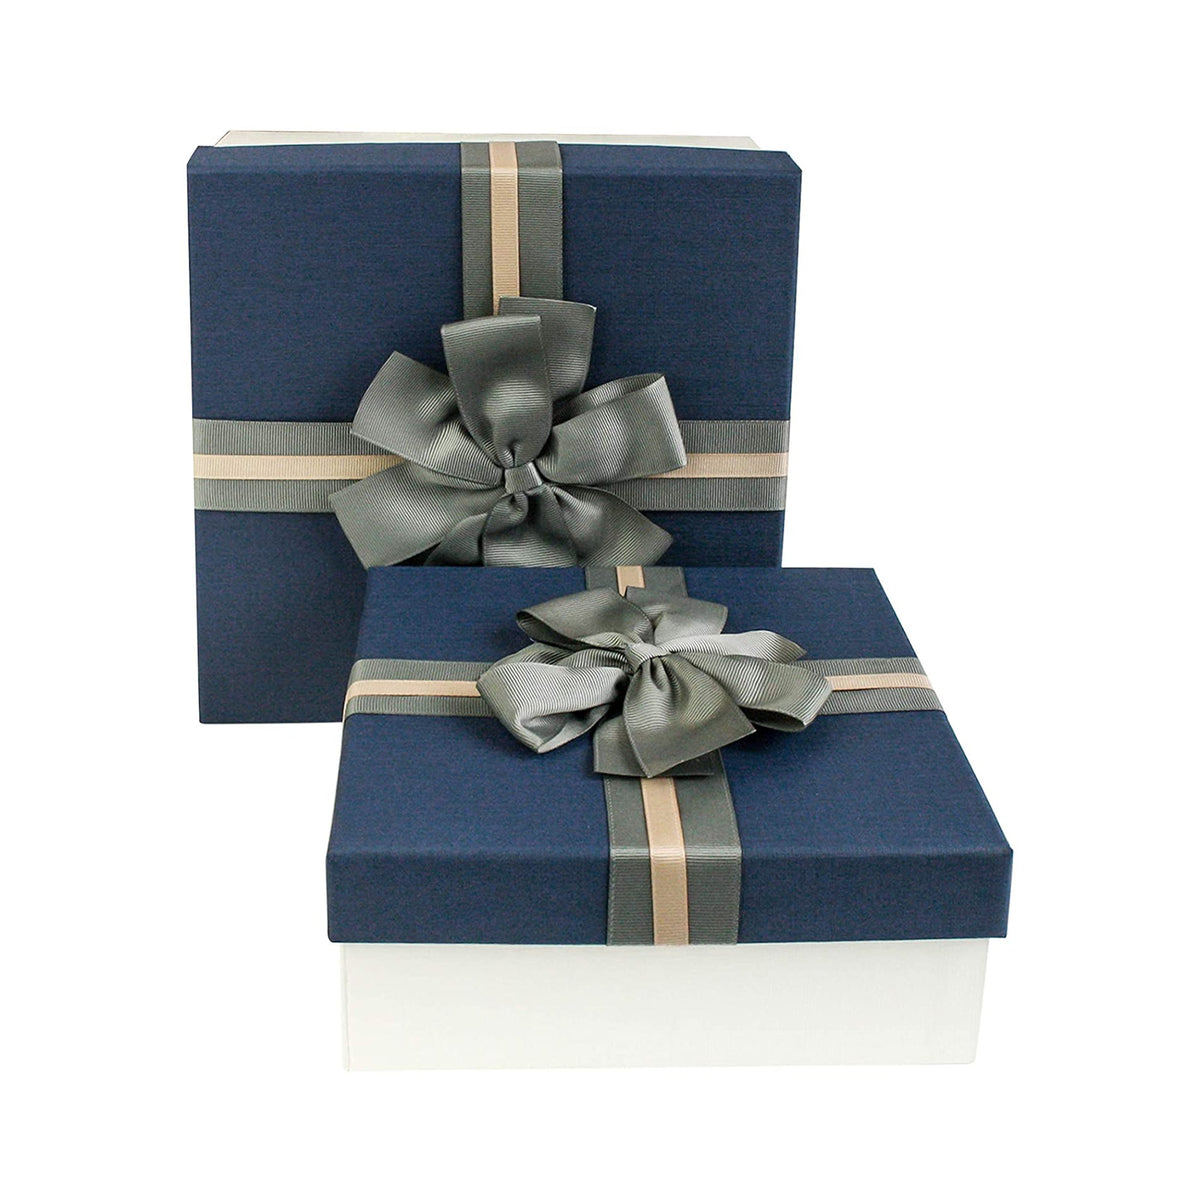 Set of 2 Cream/Blue Gift Boxes with Grey Satin Ribbon (Sizes Available)